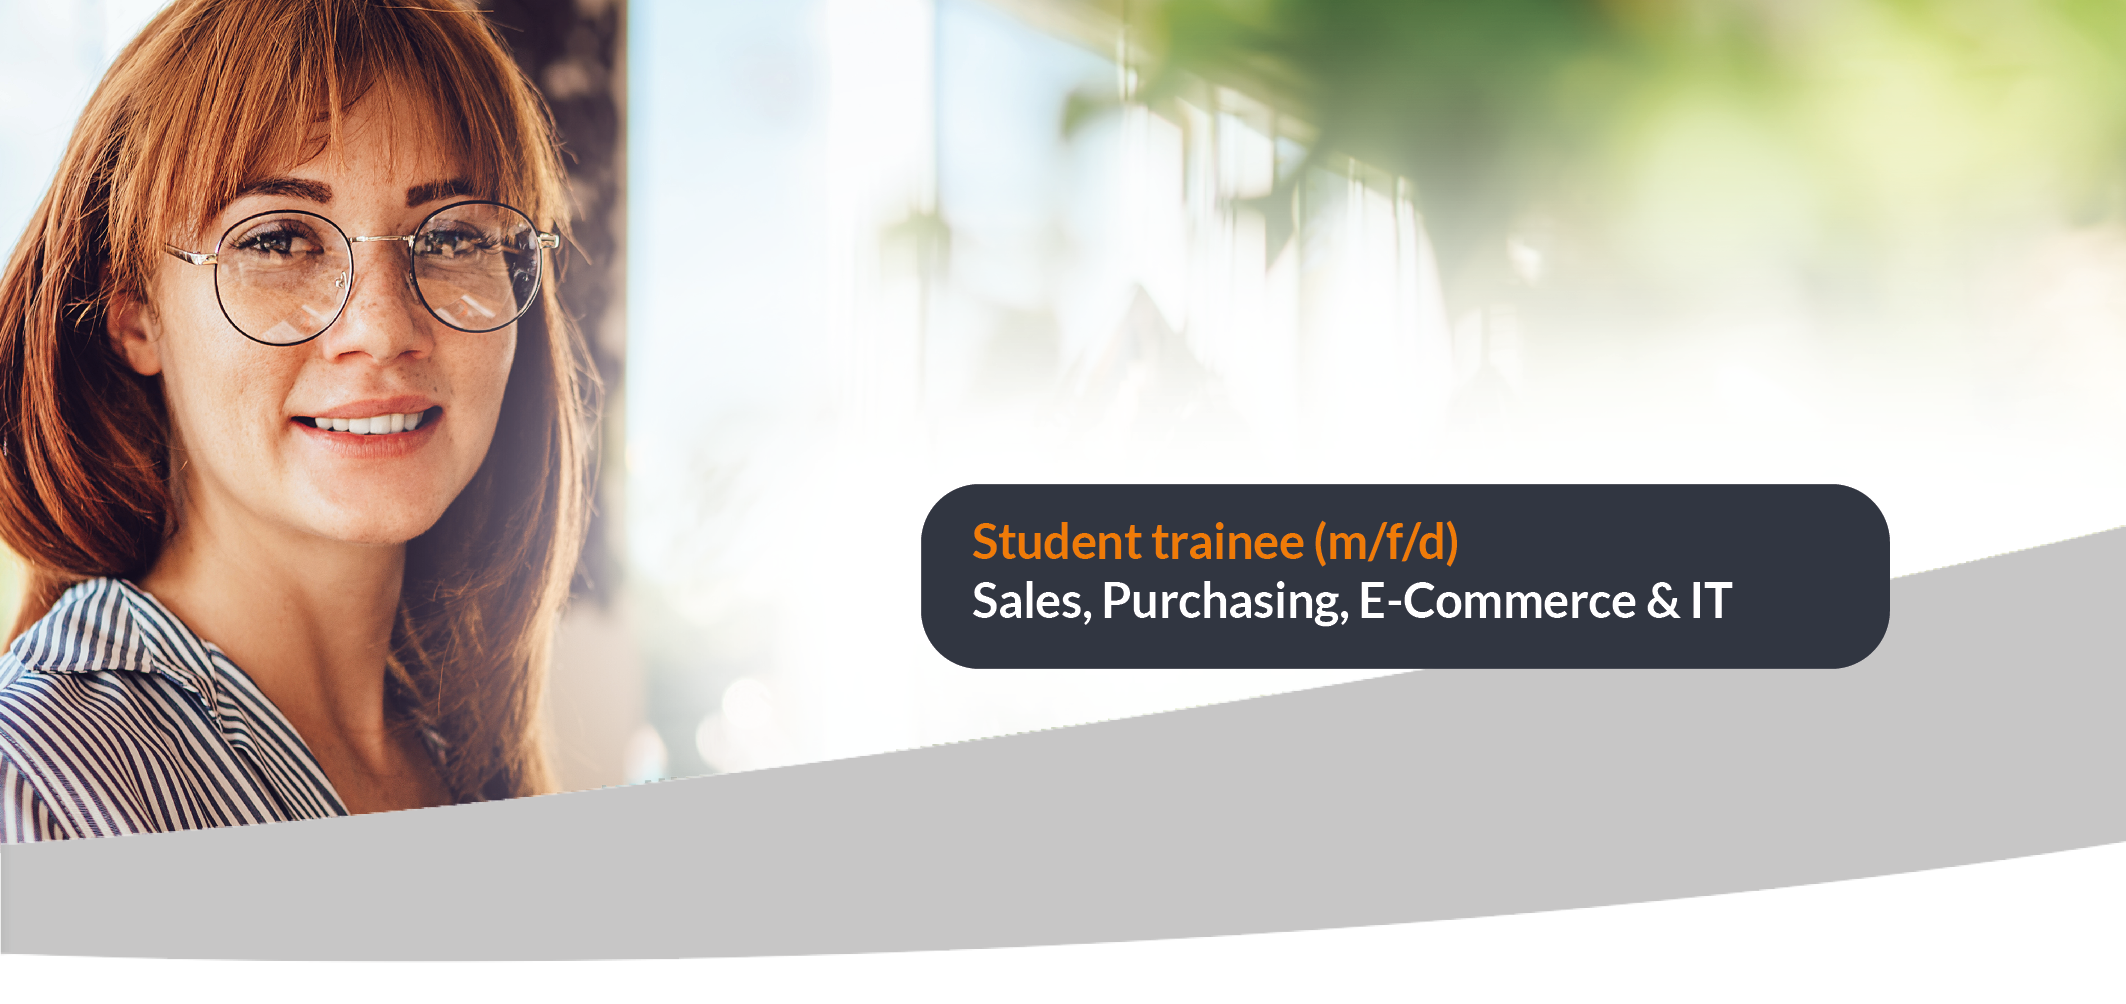 Working student (m/f/d) sales, purchasing, e-commerce & IT part-time immediately 1